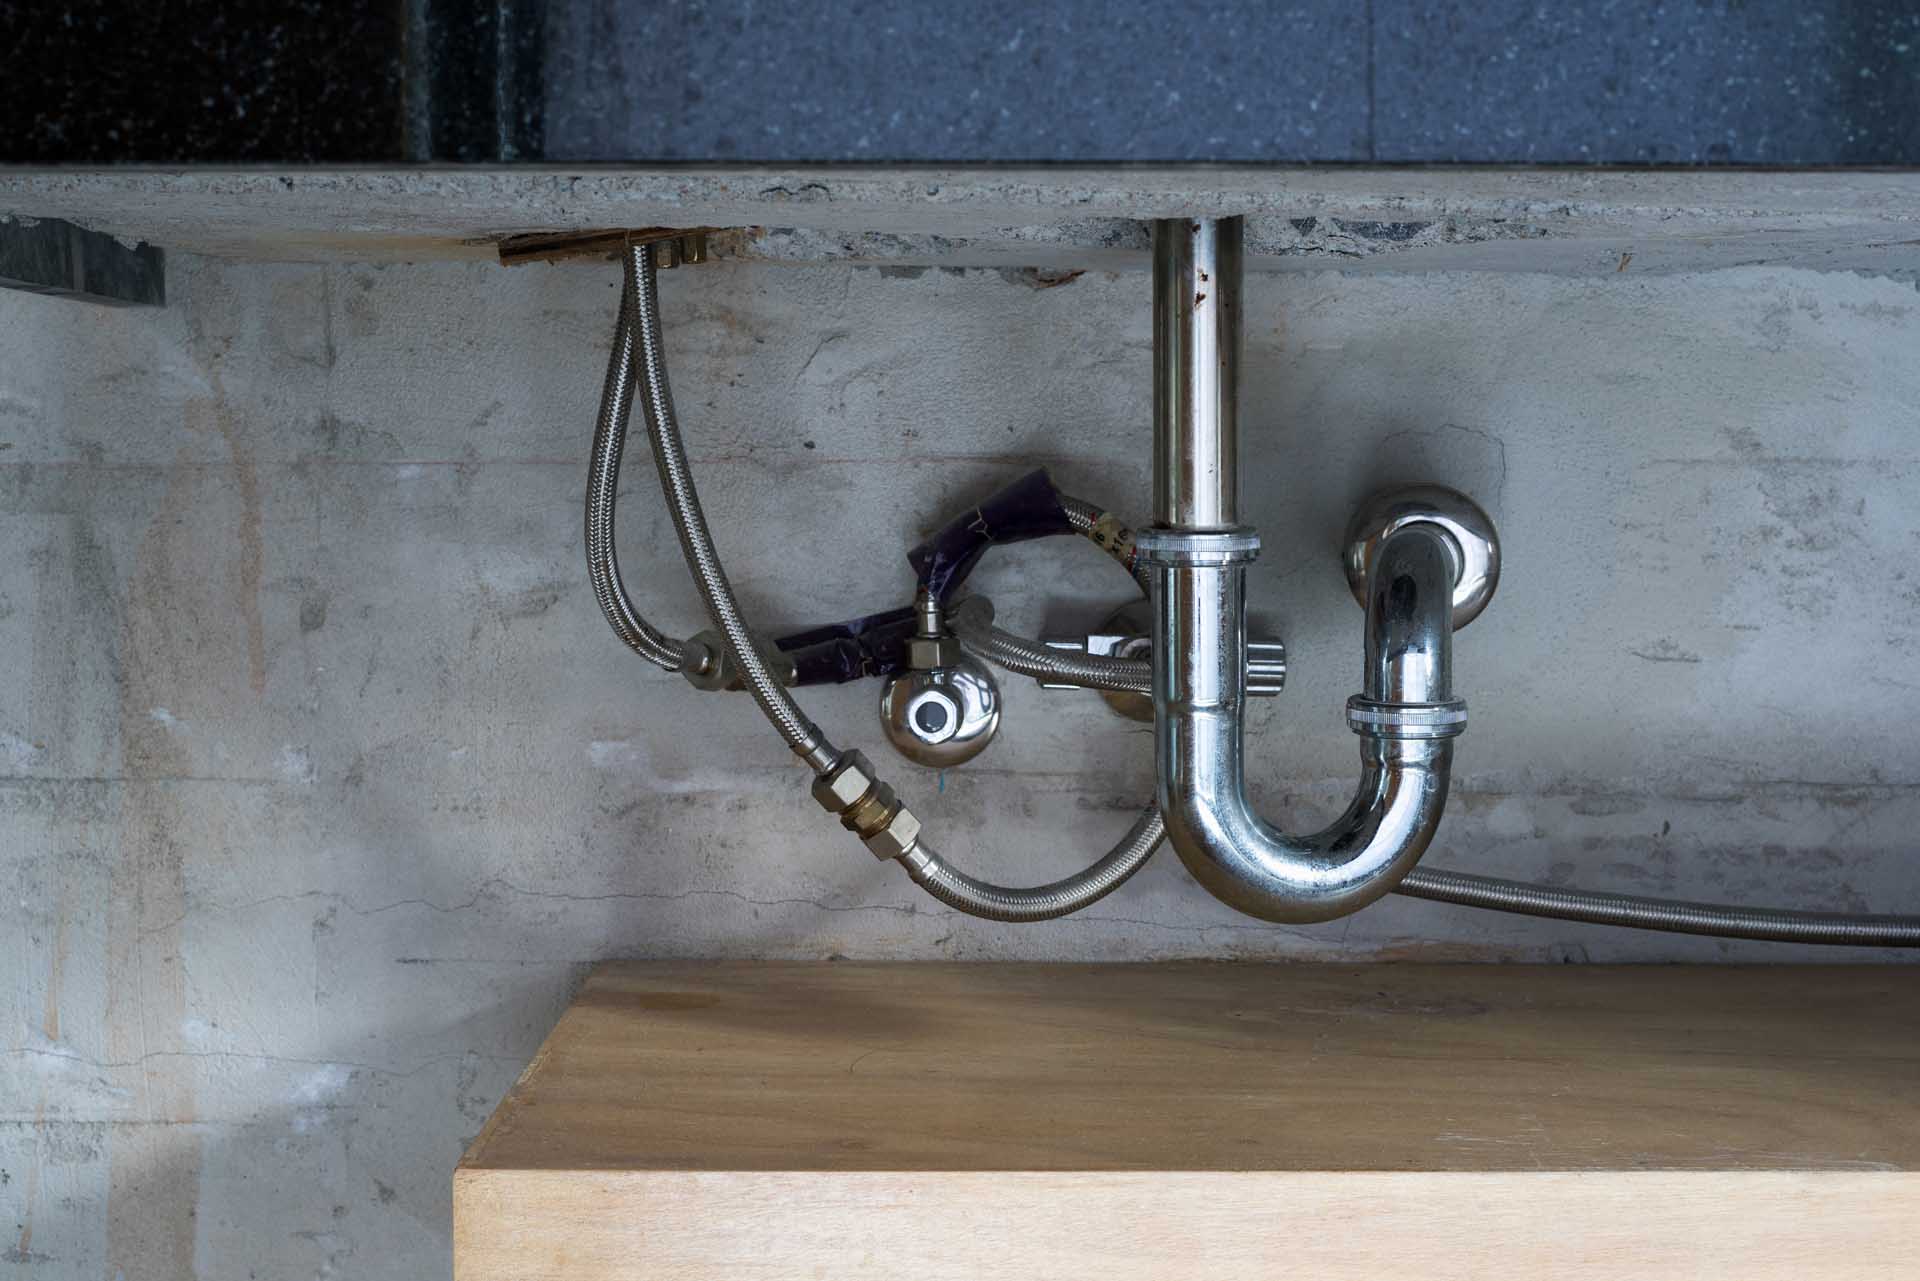 Bathroom stainless steel sink pipes, trap and drain on concrete wall.; Shutterstock ID 680252392; PO: 25pack; Job: 20180906; Client: tt; Other: aa